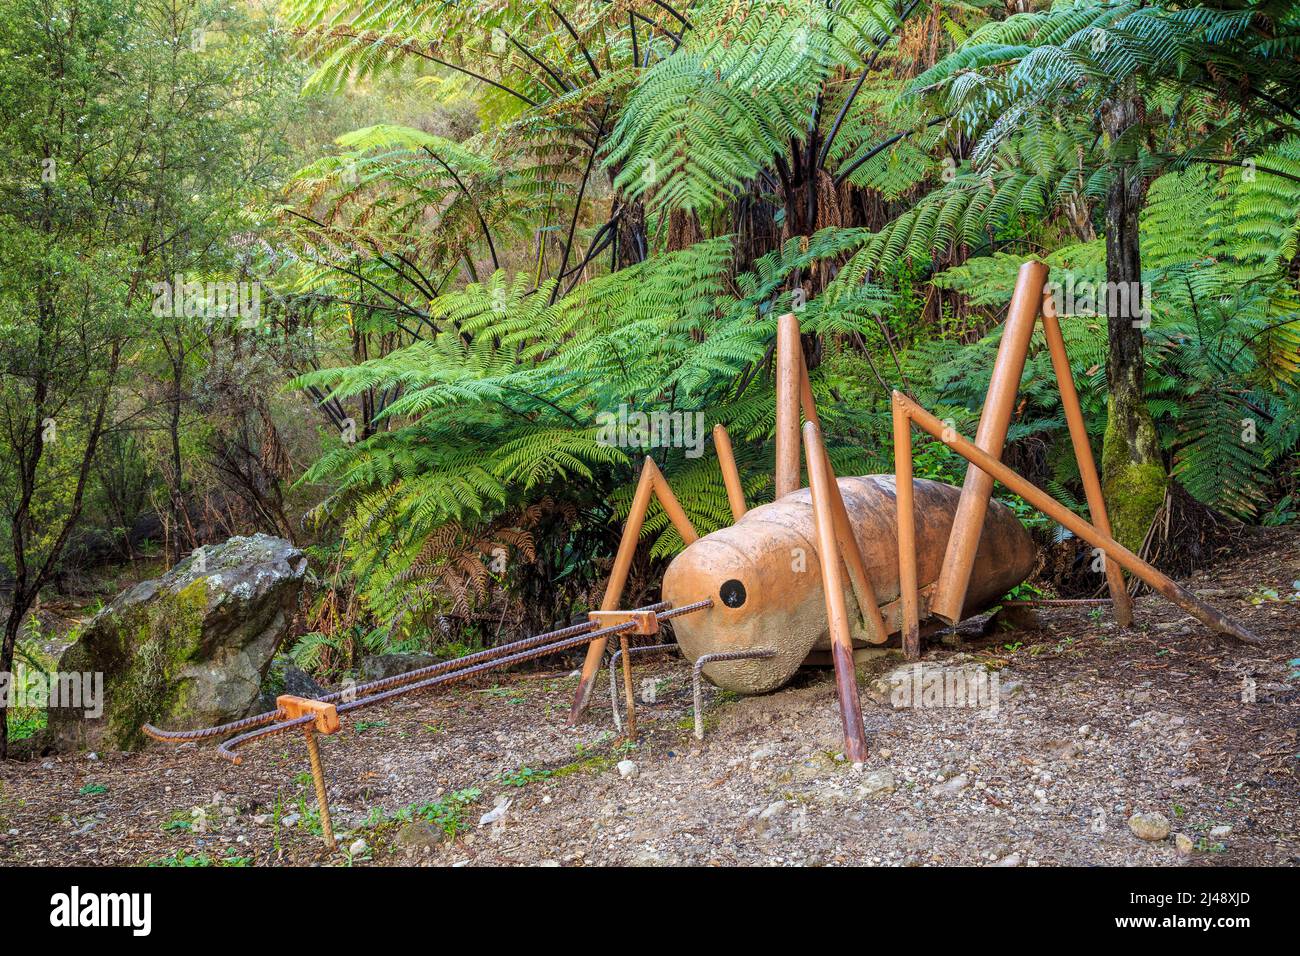 A metal sculpture of a weta (a New Zealand insect) in Te Puna Quarry Park, Te Puna, New Zealand Stock Photo